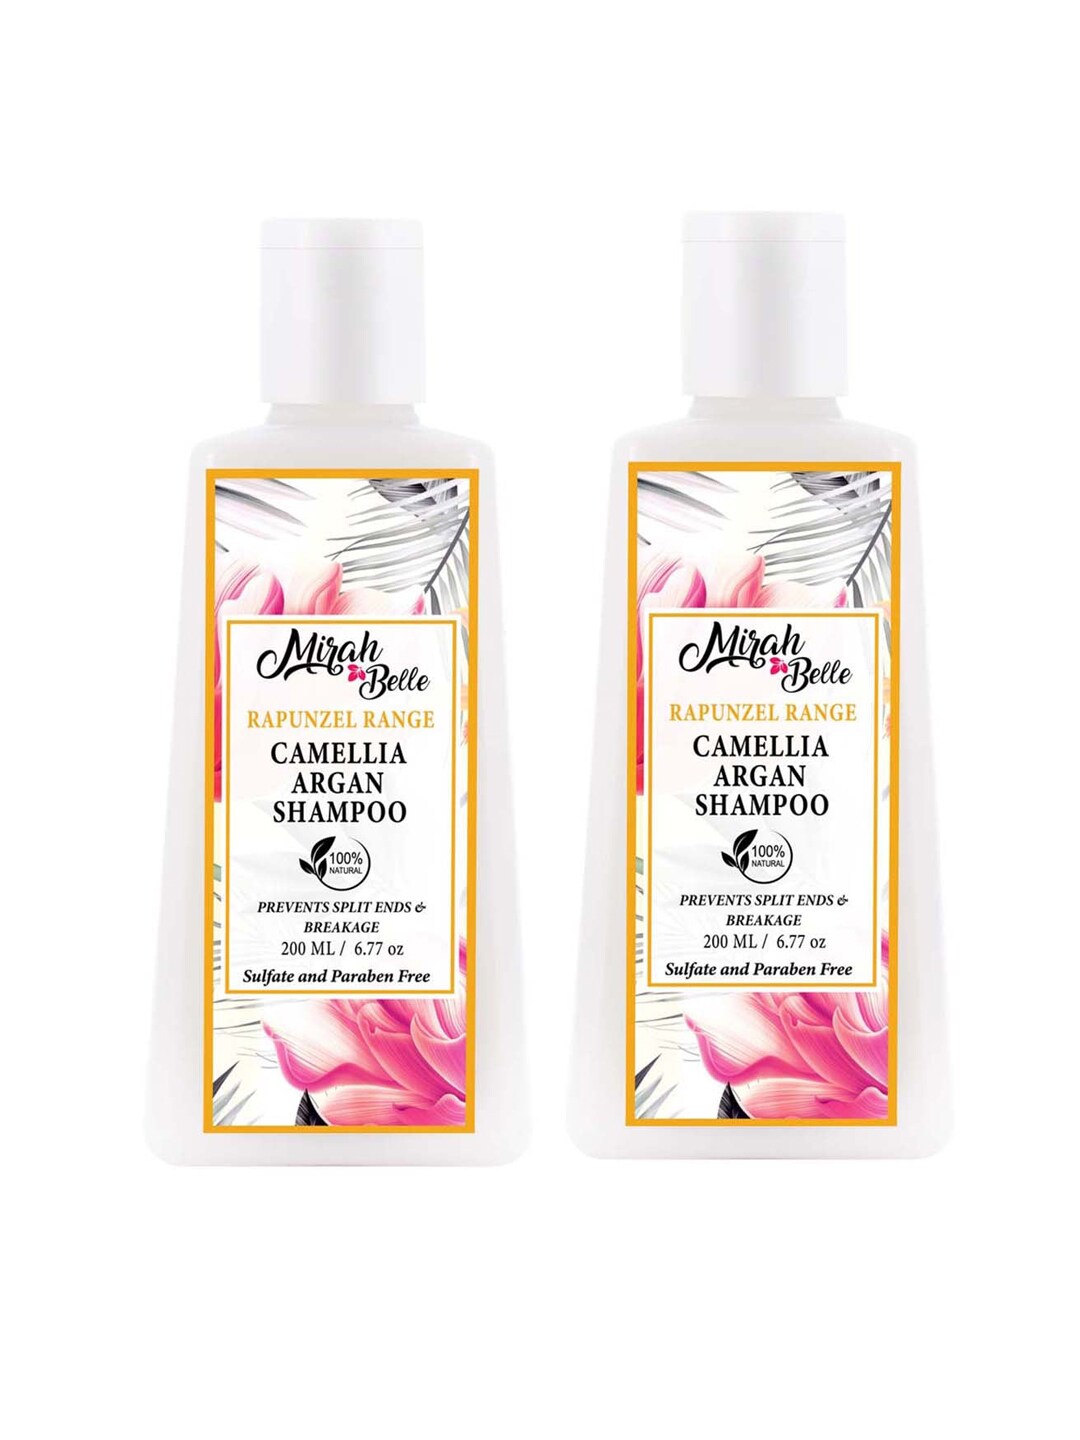 Mirah Belle Pack of 2 Camellia Argan Shampoo Frizzy Hair & Split Ends - 200 ml (each) Price in India